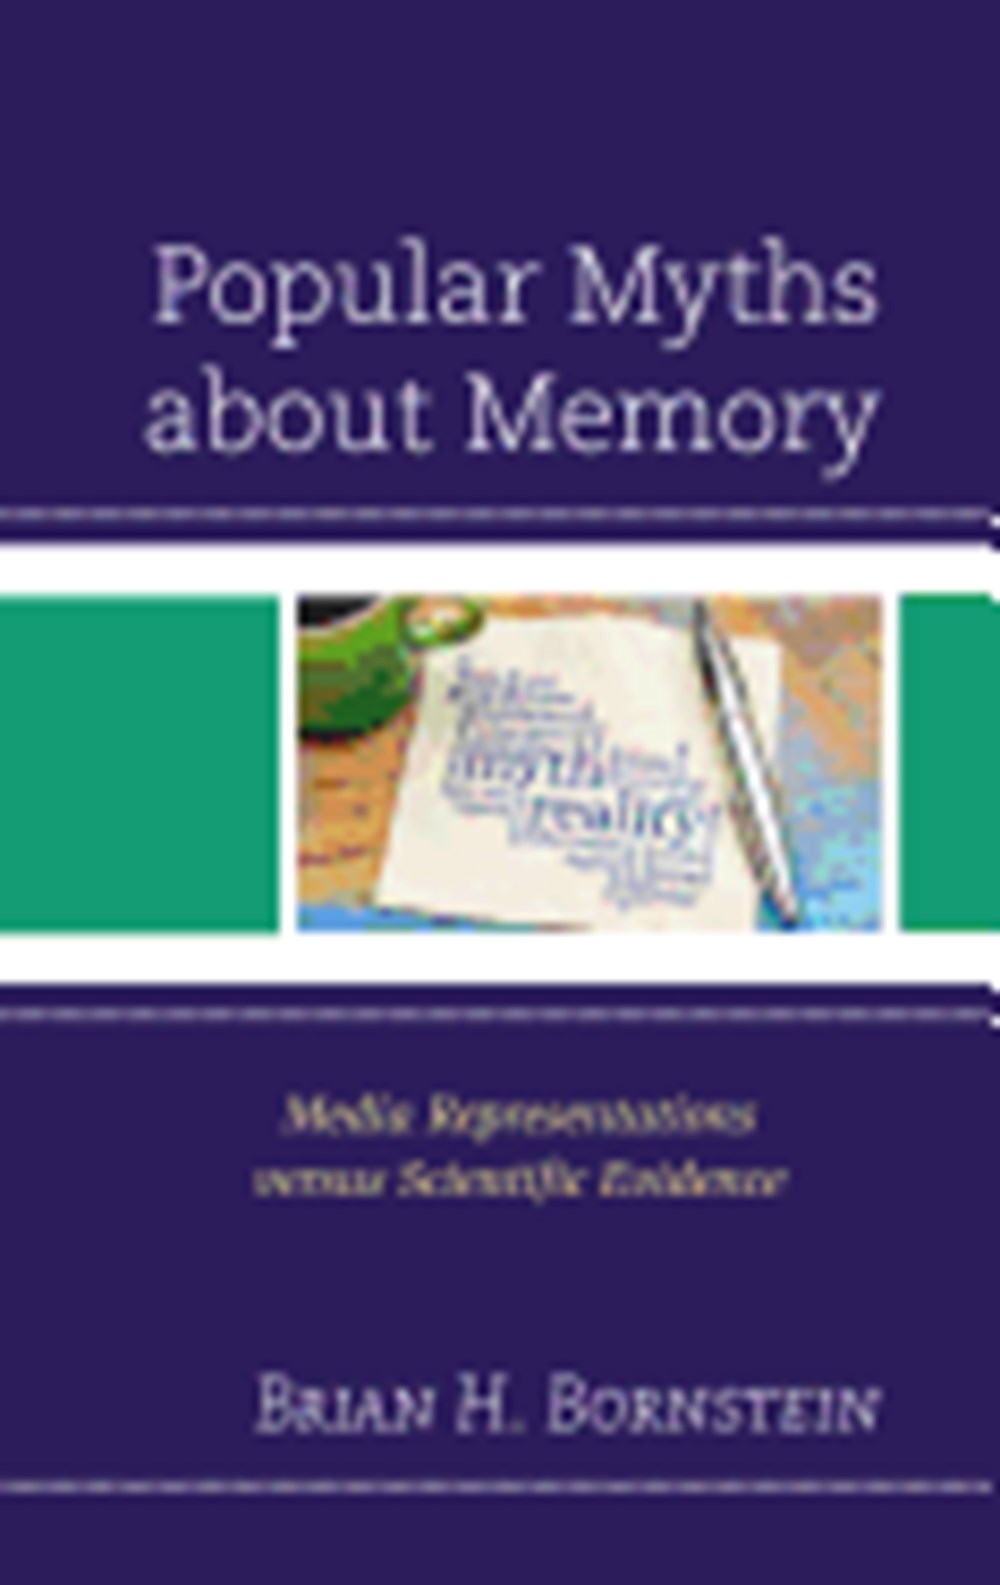 Popular Myths about Memory: Media Representations Versus Scientific Evidence